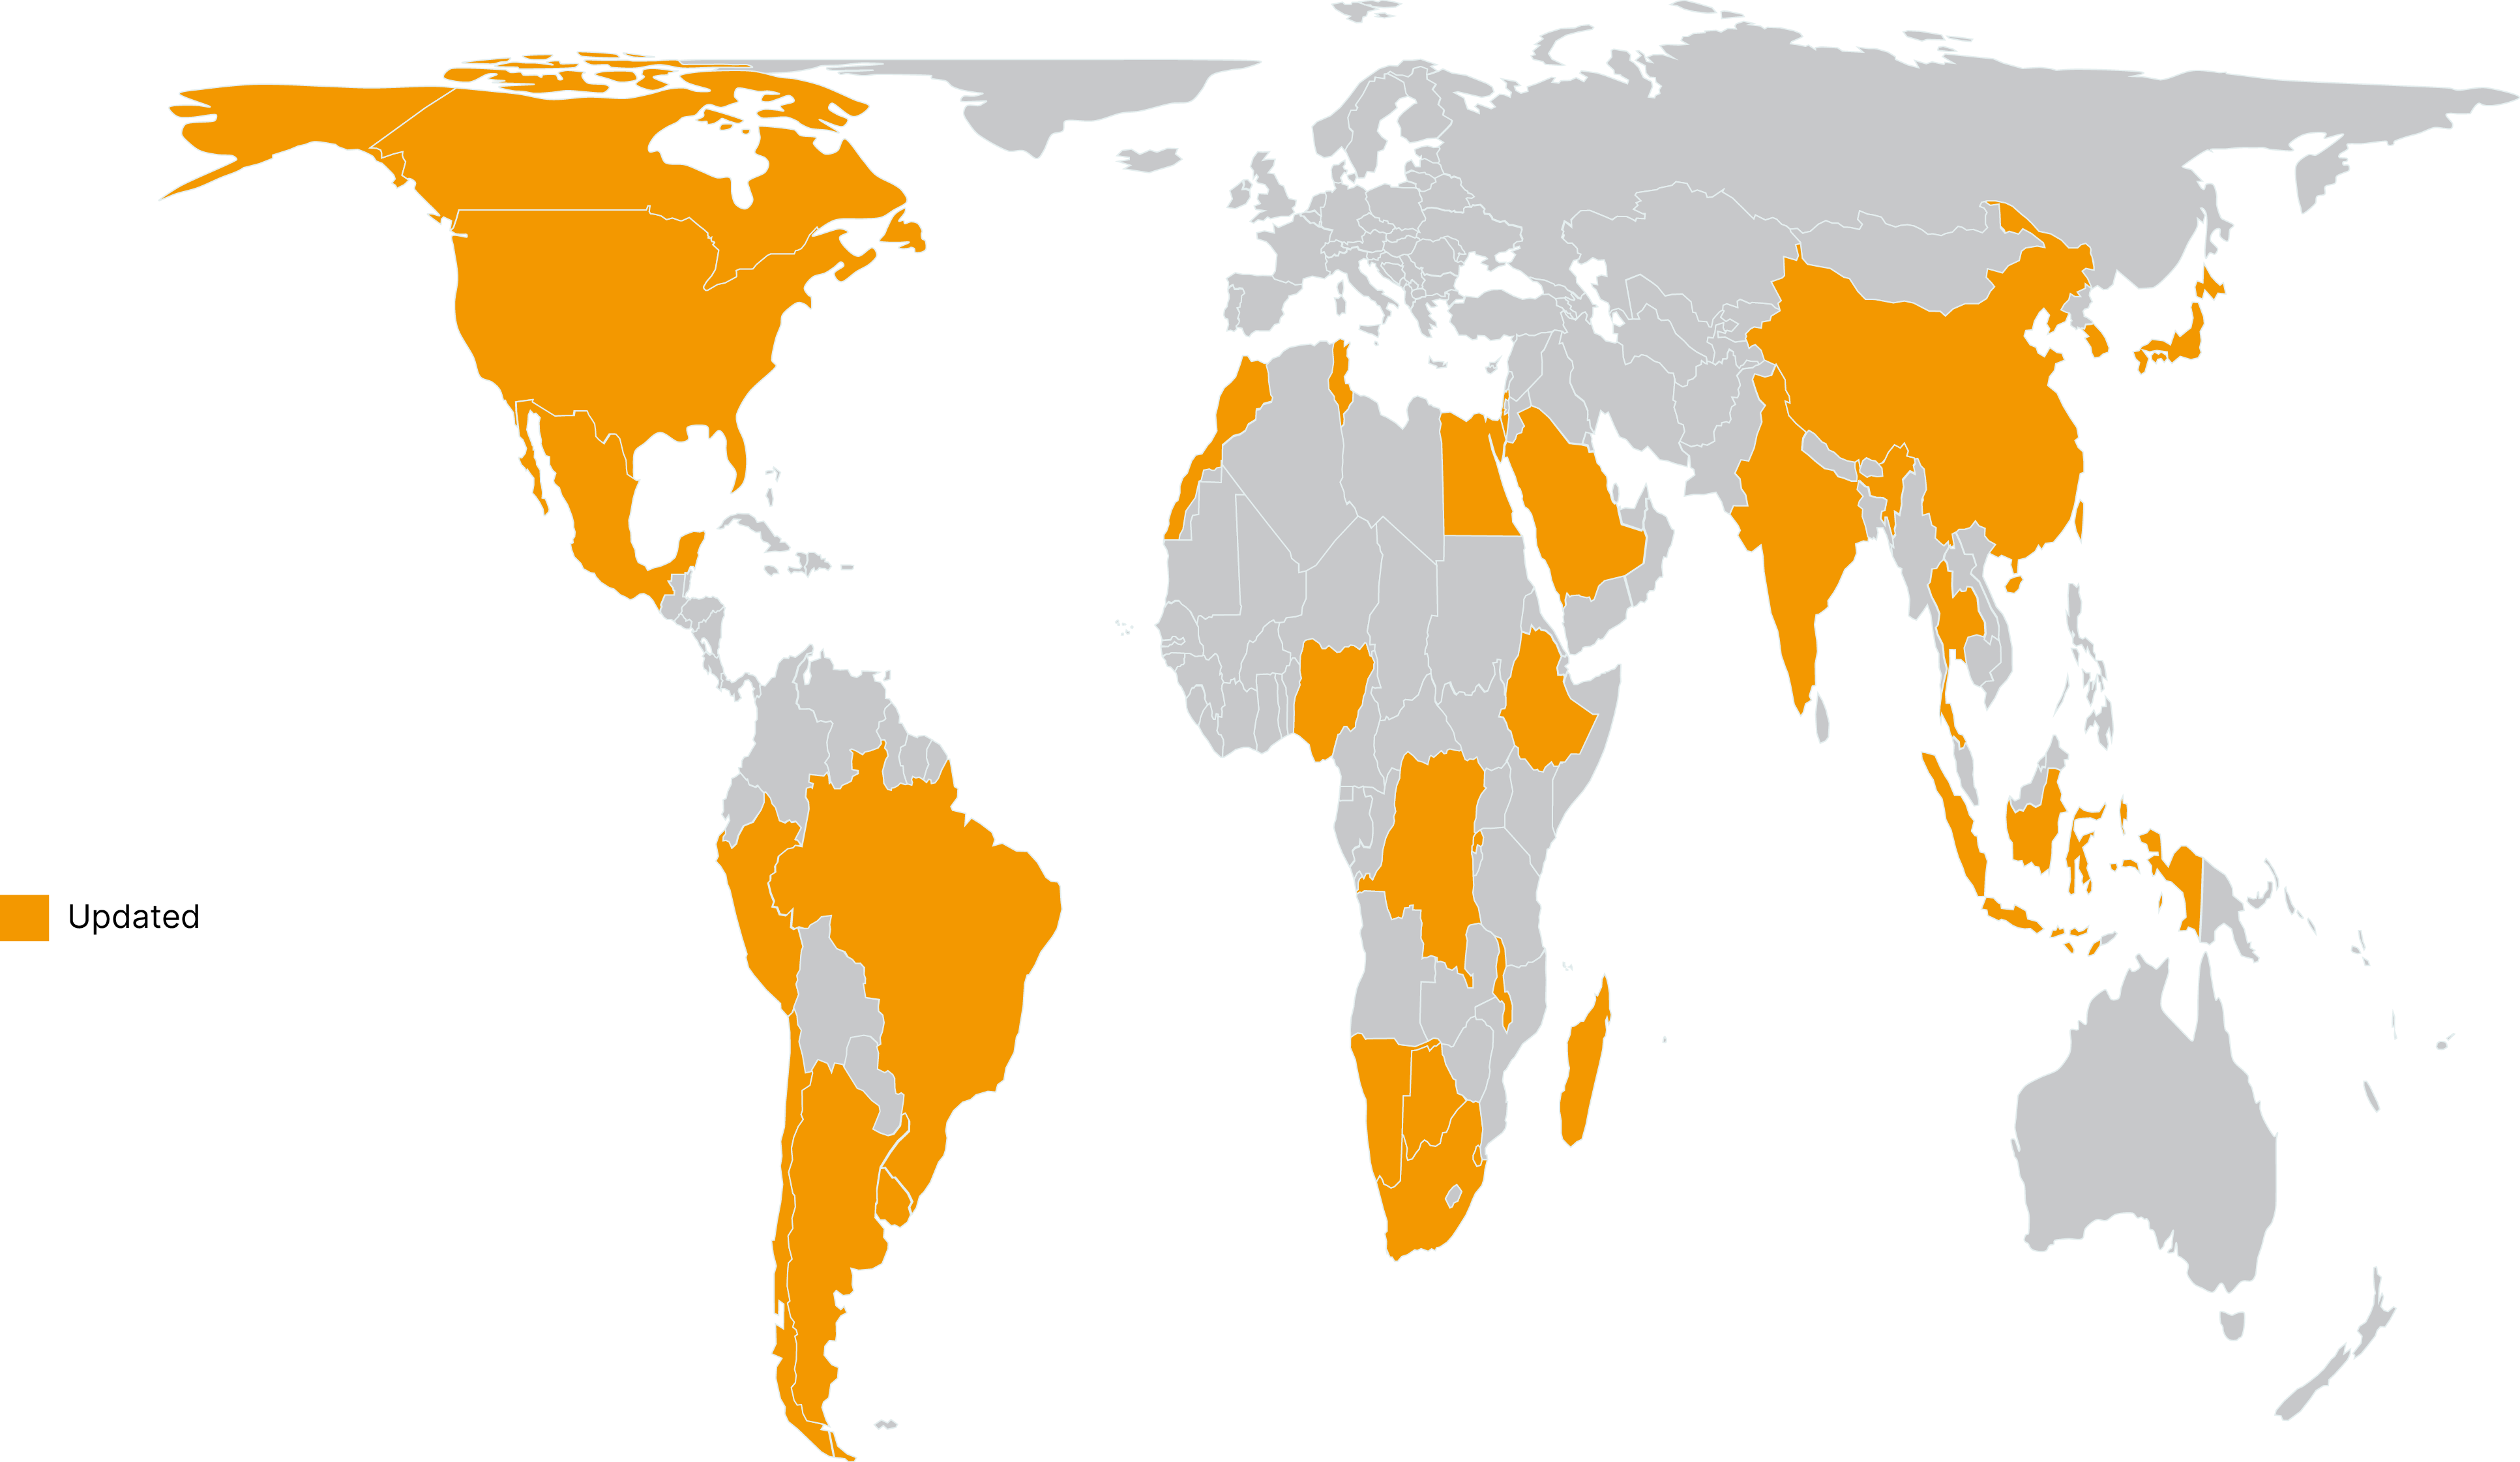 World map with countries colored orange to indicate that they were updated